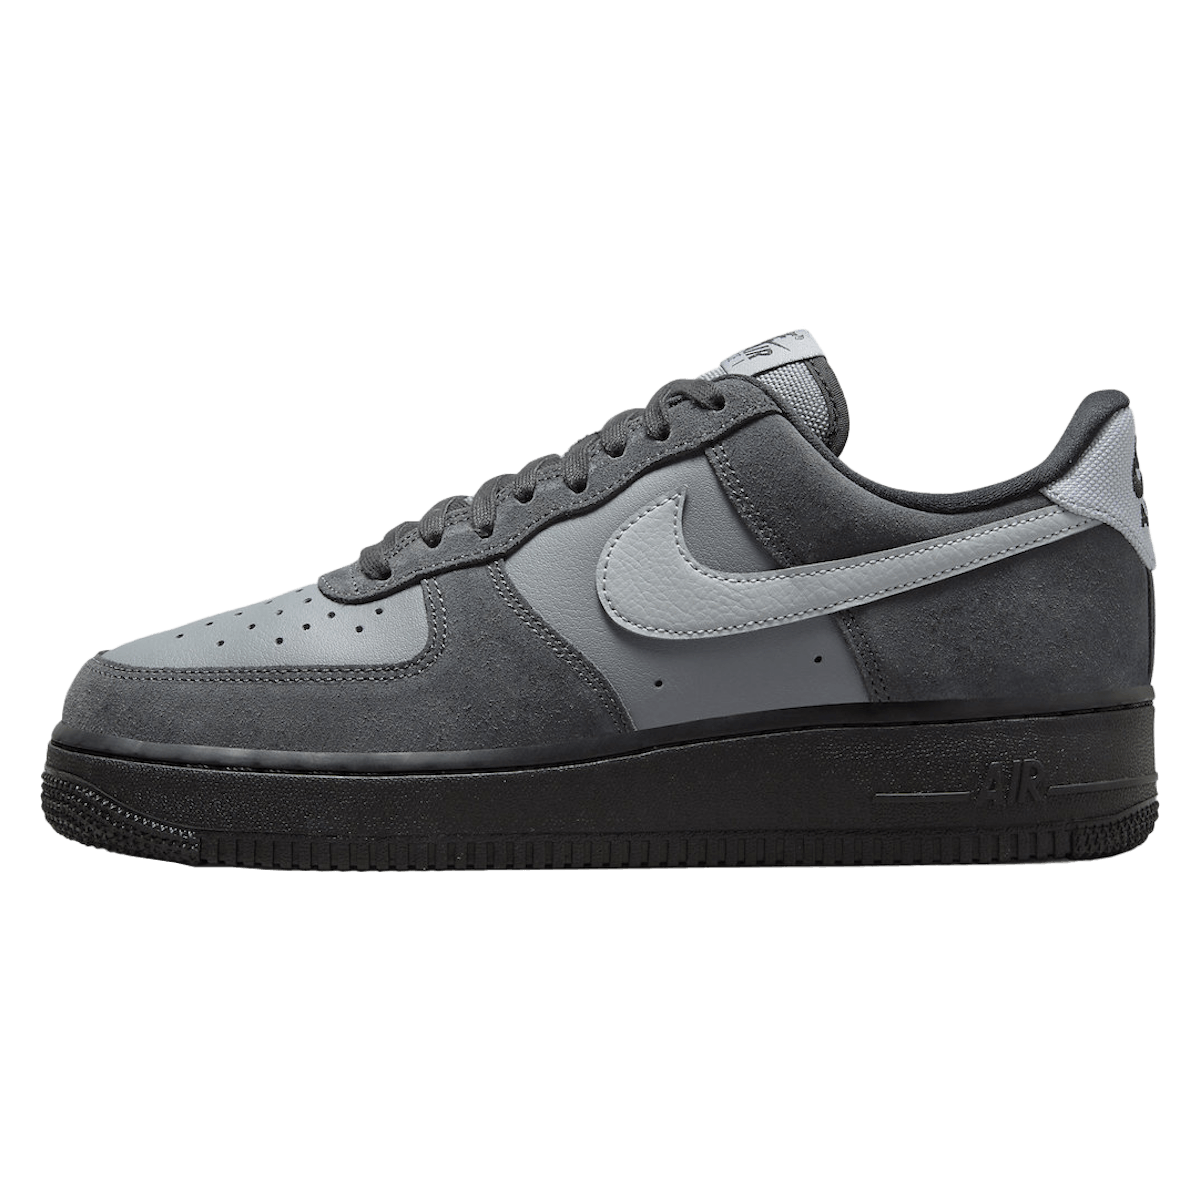 Nike Air Force 1 Low "Anthracite"